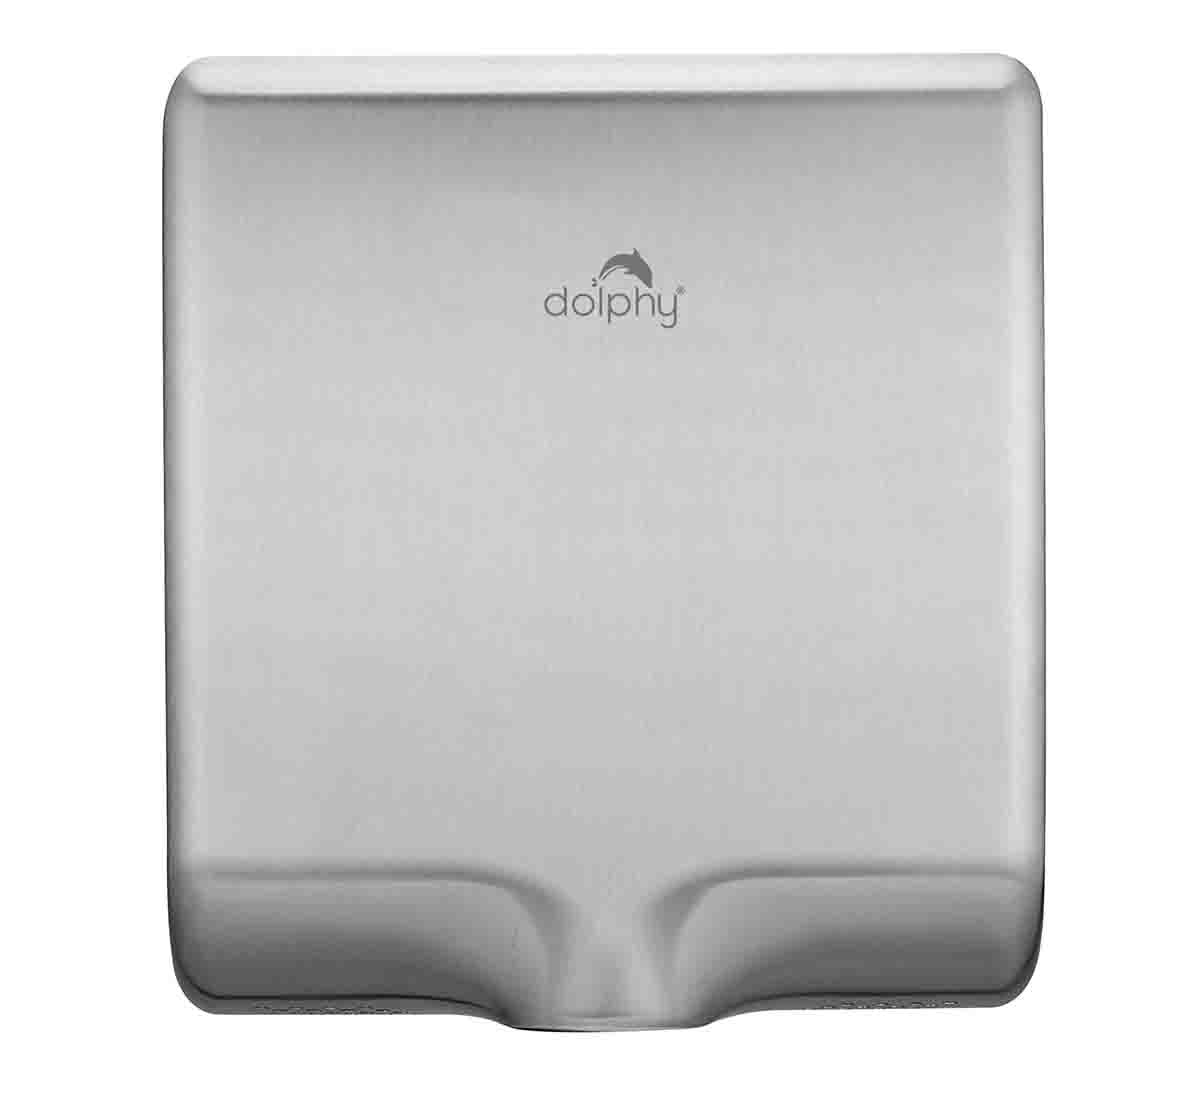 Brush Motor Hand Dryer With Stainless Steel Material